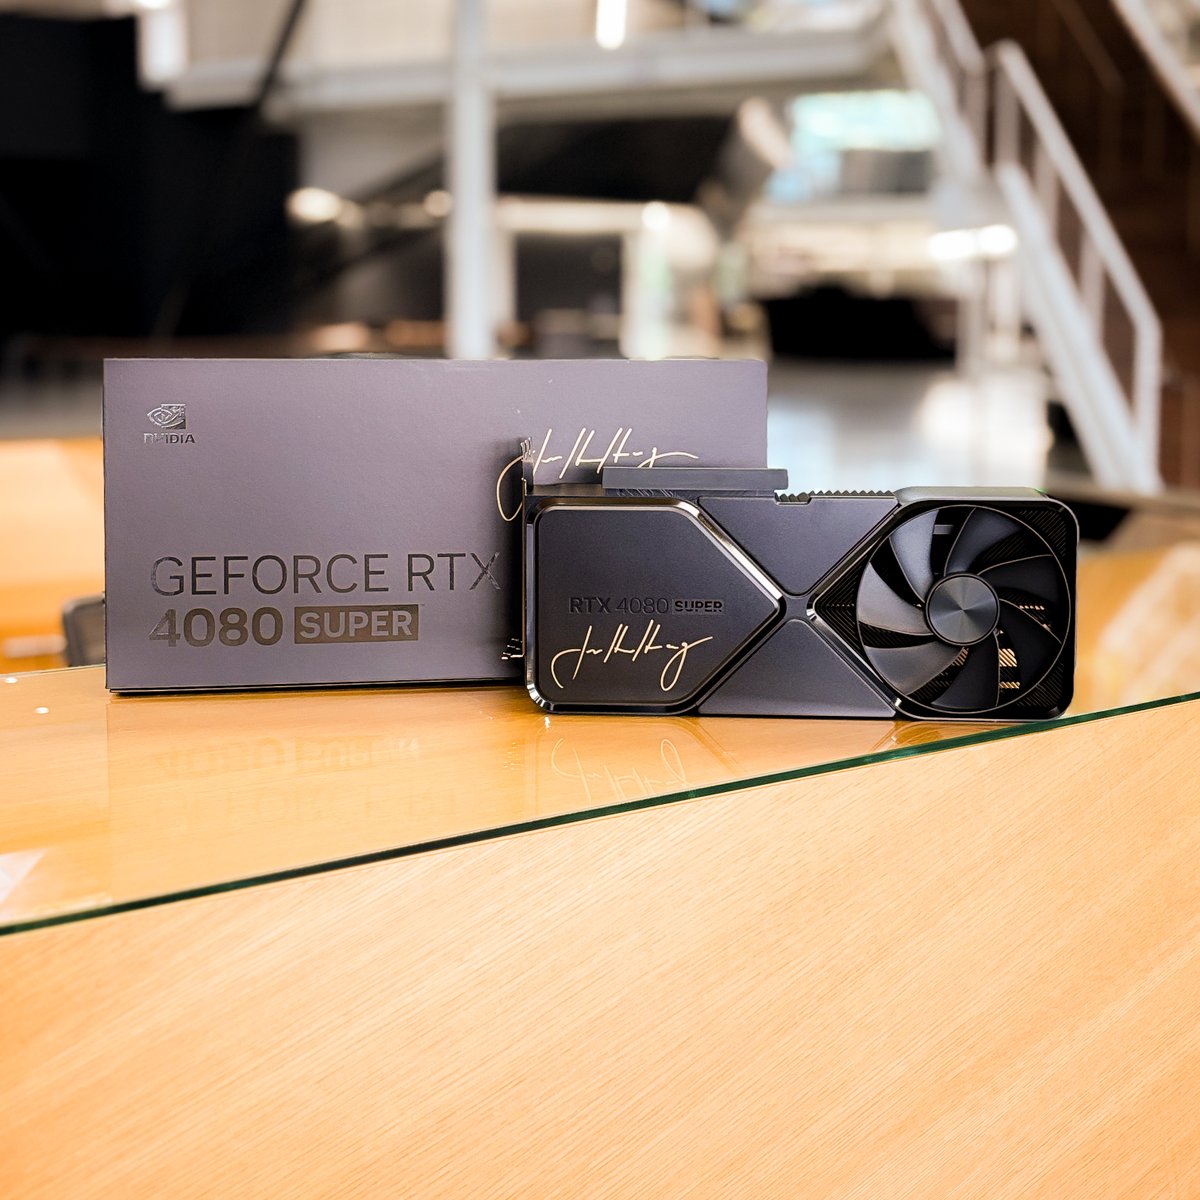 We’re giving you TWO ways to WIN a one-of-a-kind GeForce RTX 4080 SUPER signed by NVIDIA CEO, and founder, Jensen Huang 👀 If you’re at CES head to our partner booths to enter 👉 nvidia.com/en-us/geforce/… Want to WIN here on social? ⚫Comment #RTXSUPER ⚫Like this post